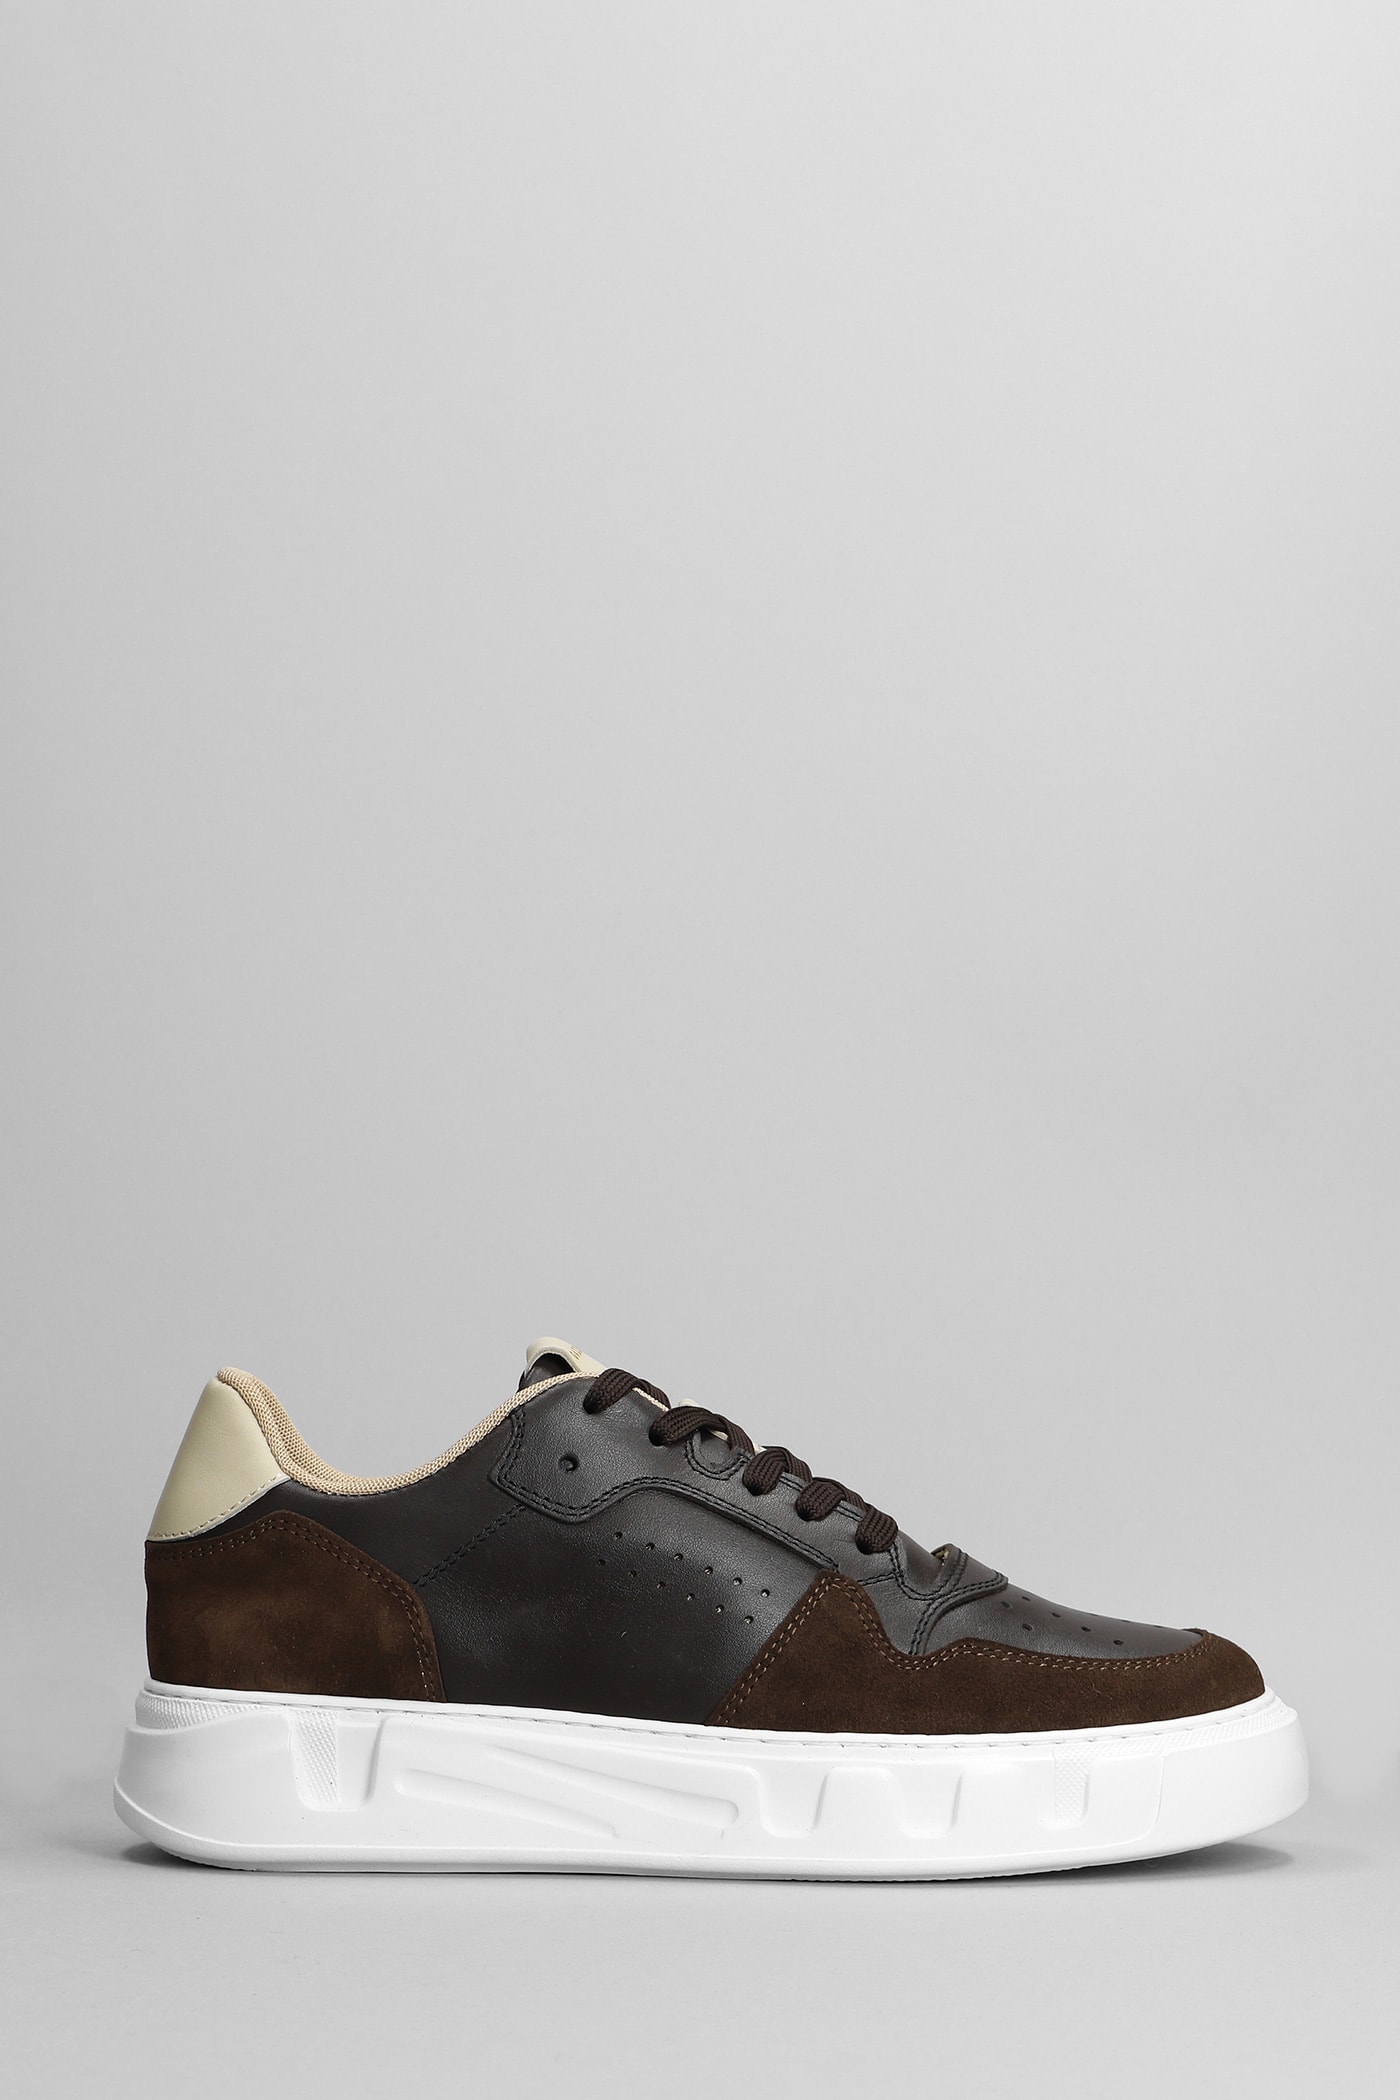 Gazzarrini Sneakers In Brown Suede And Leather